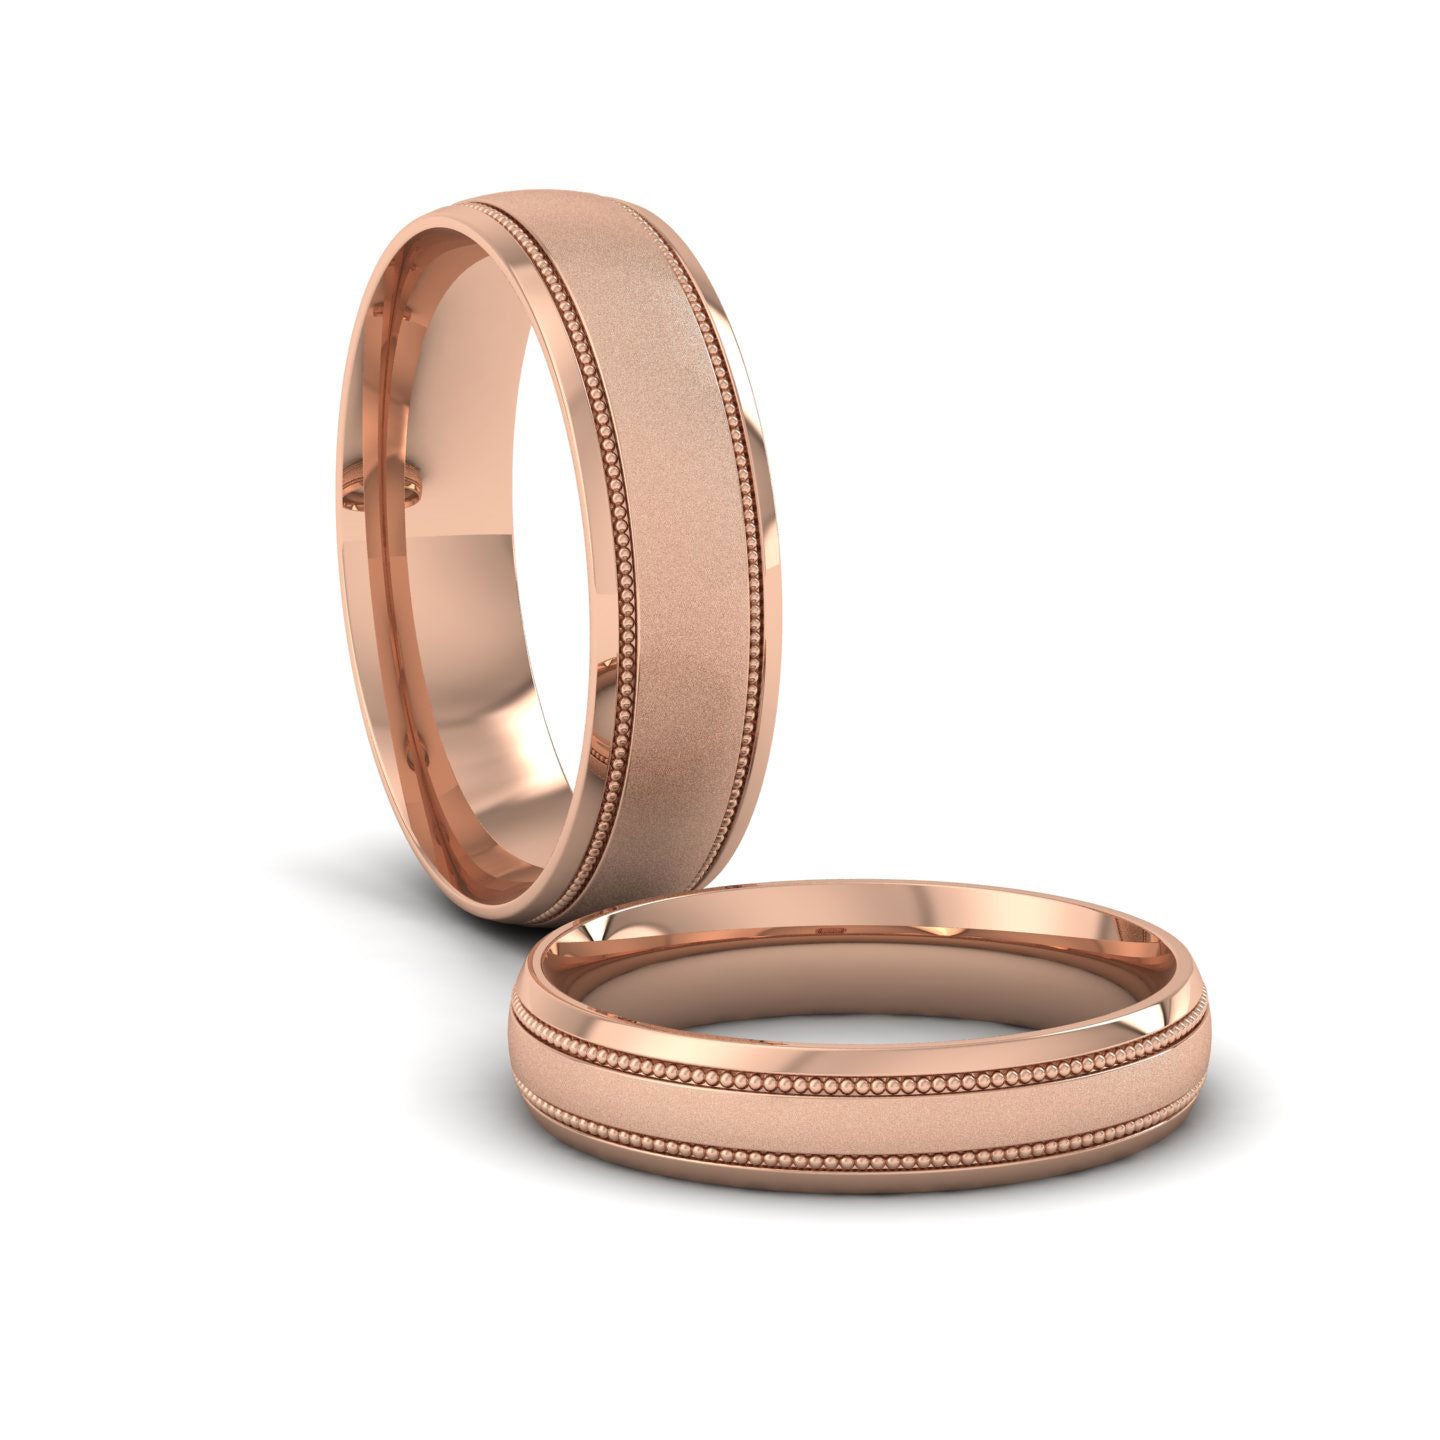 Millgrain And Contrasting Matt And Shiny Finish 9ct Rose Gold 4mm Wedding Ring